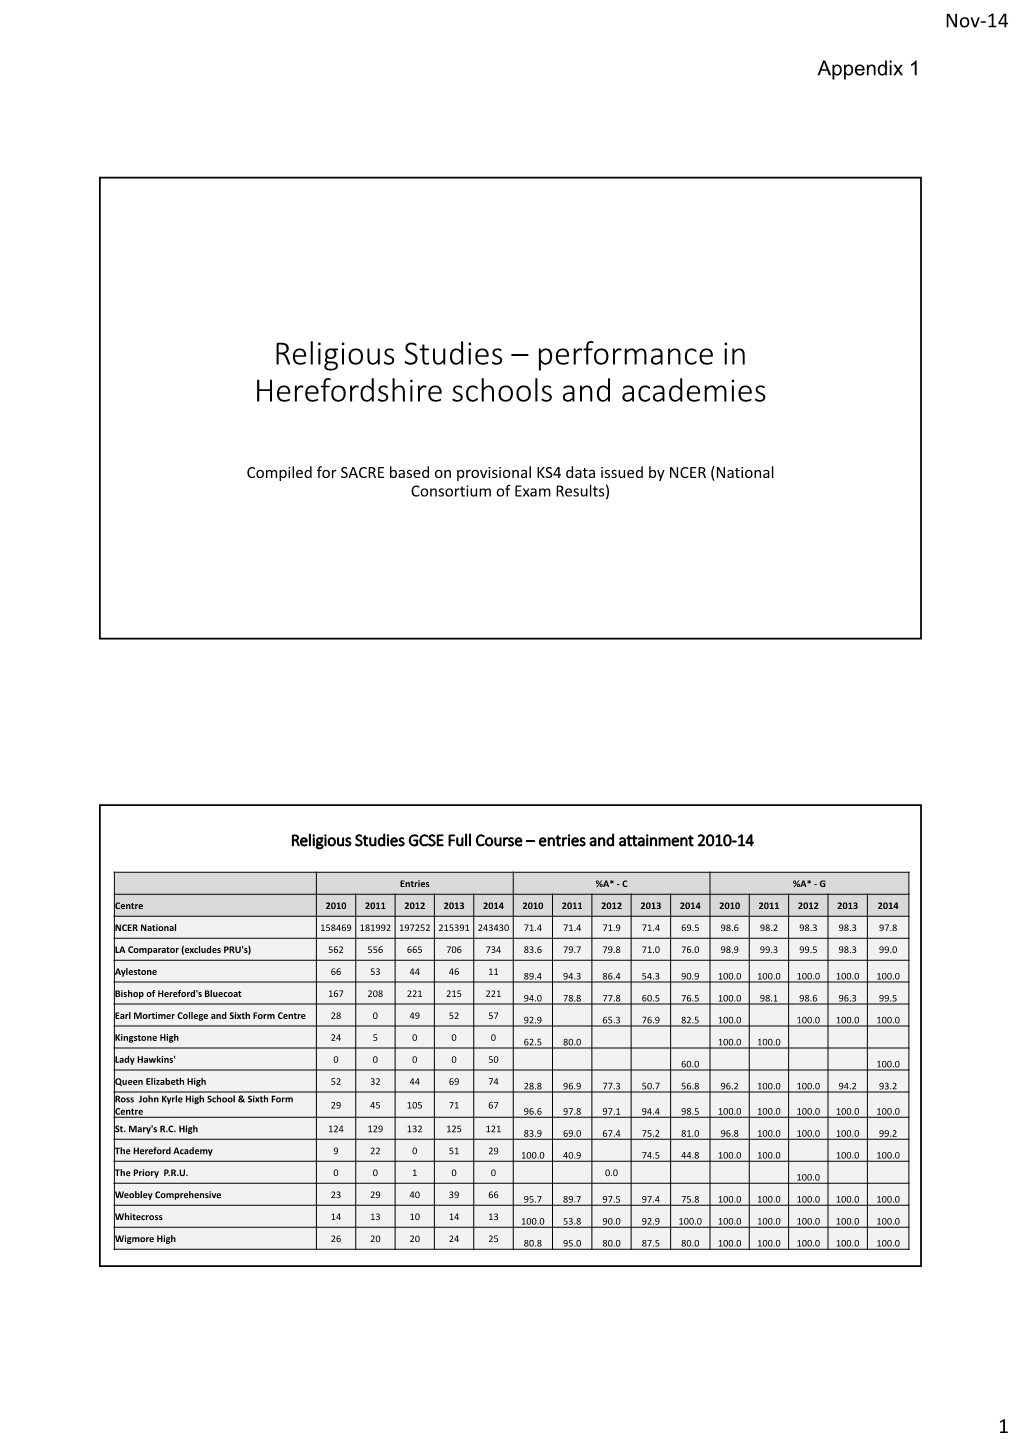 Religious Studies –Performance in Herefordshire Schools and Academies